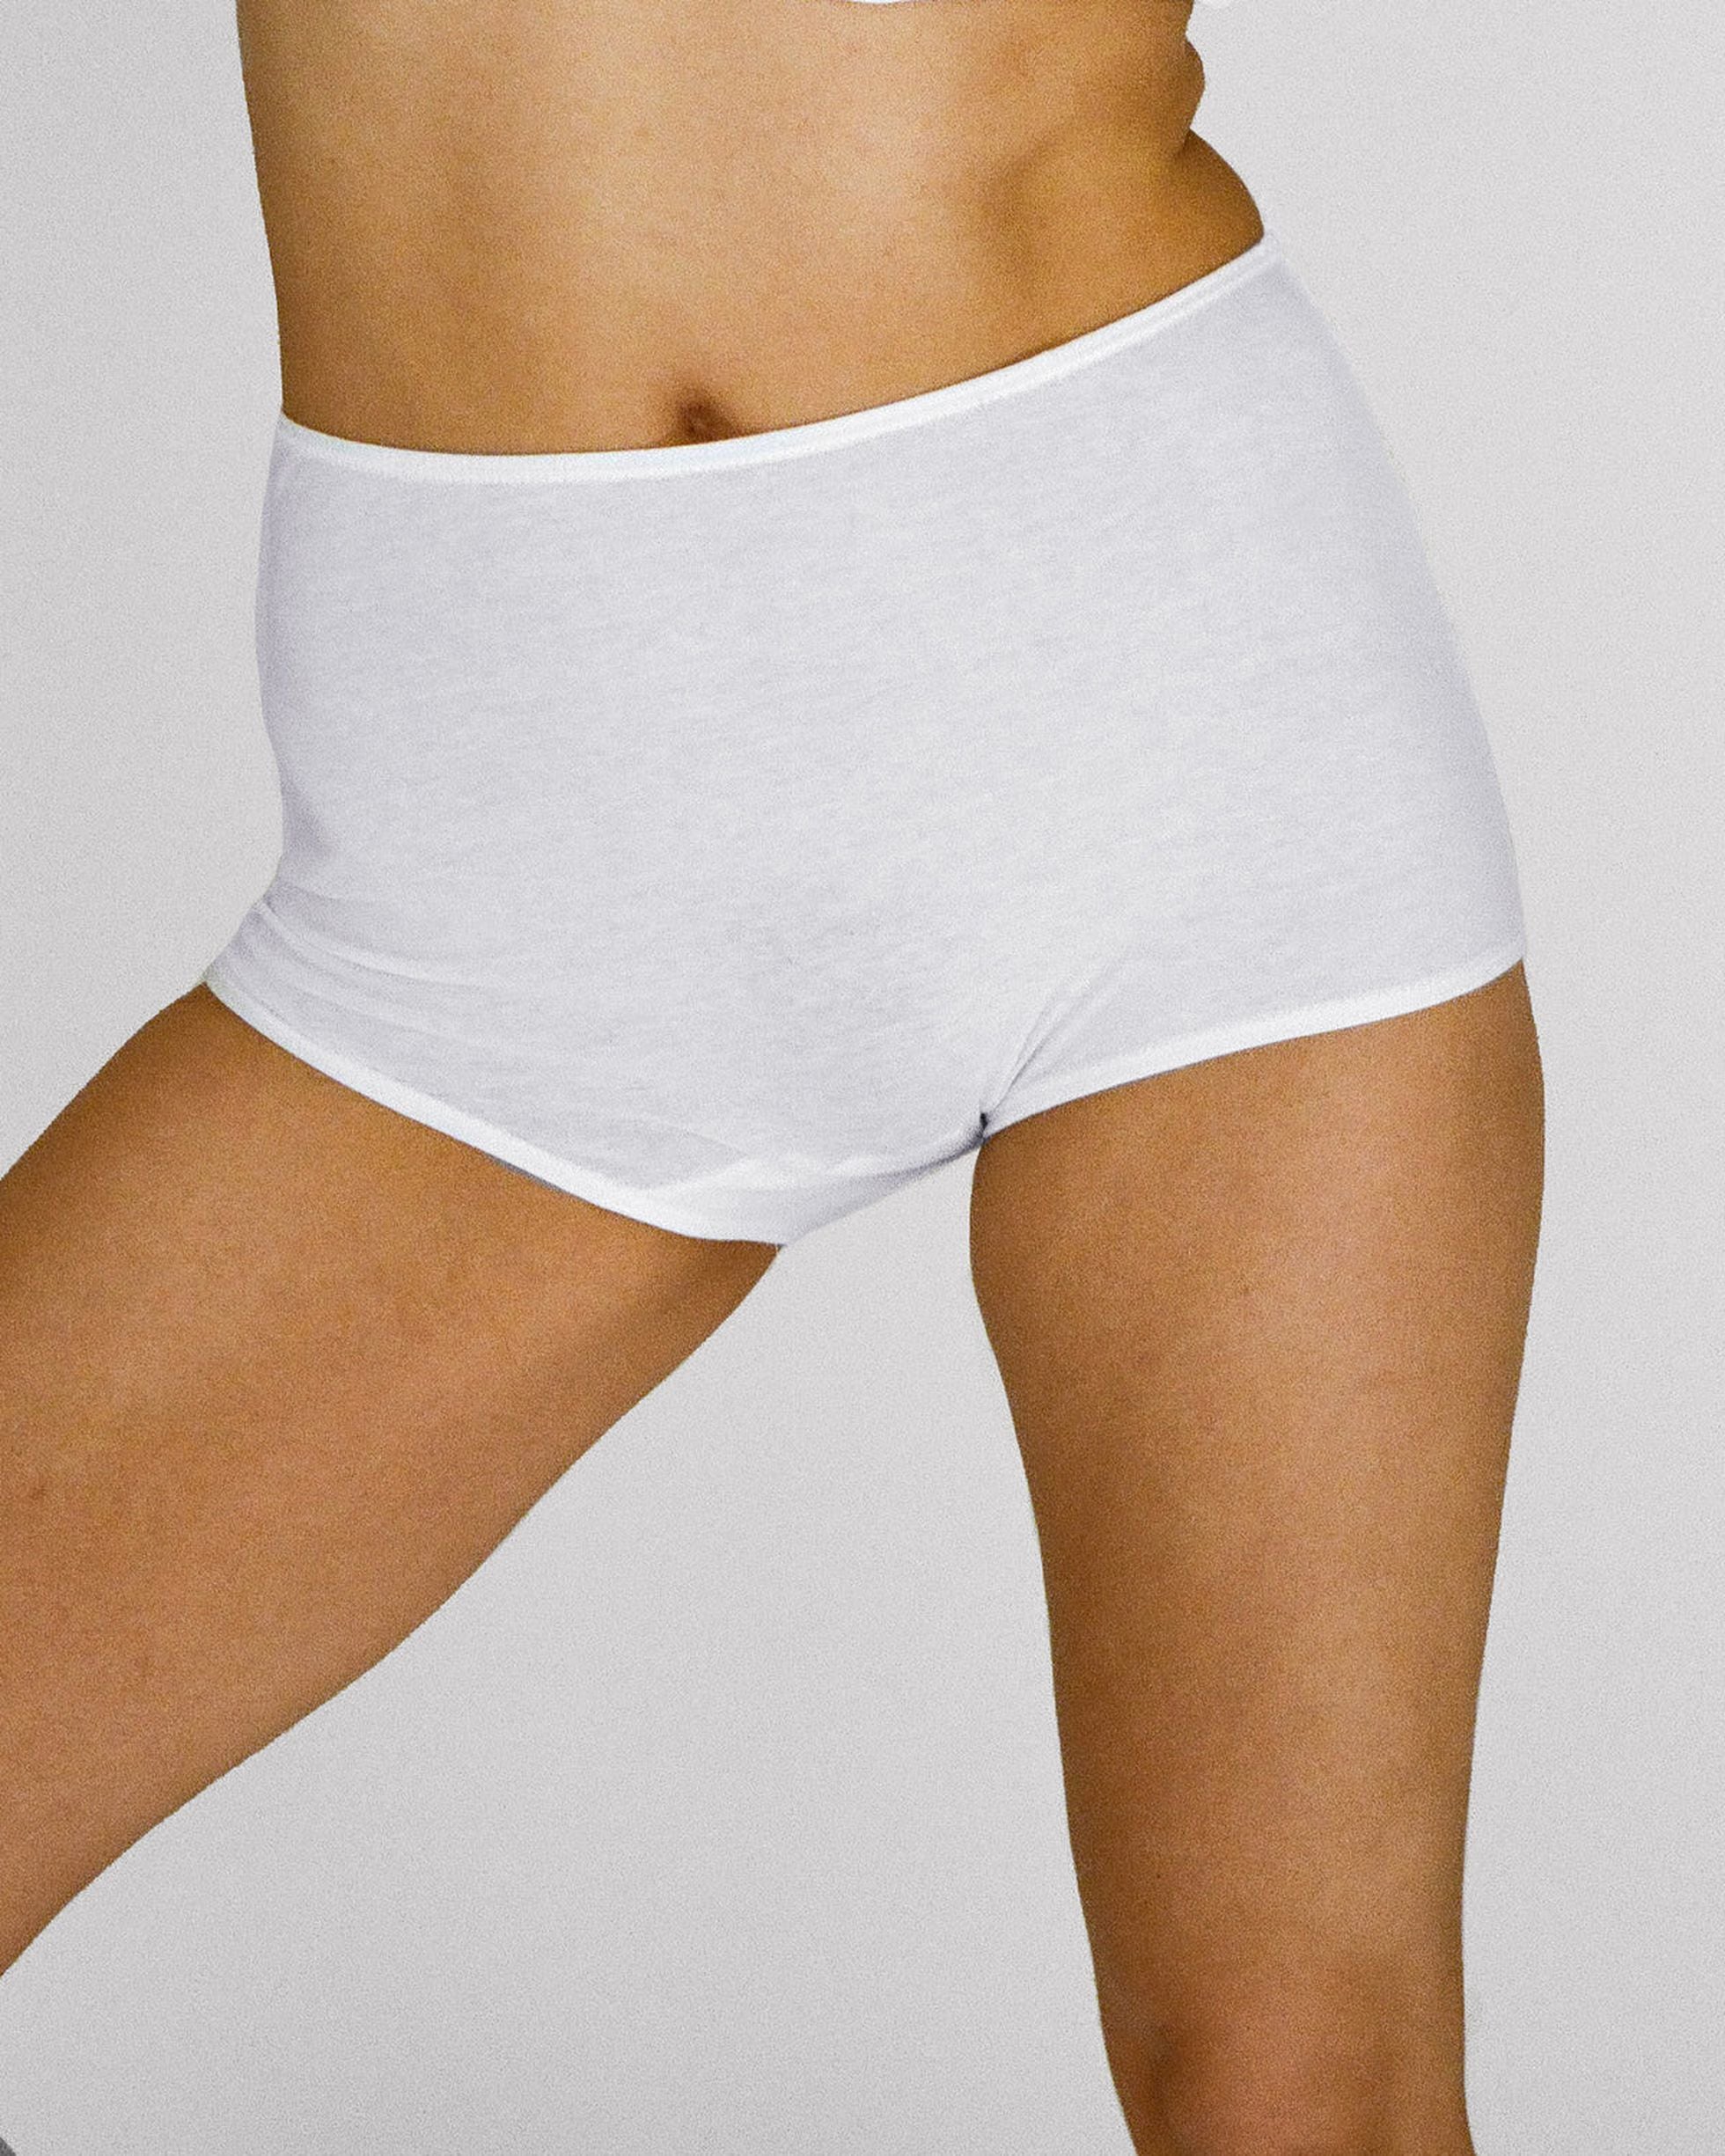 Is it healthy to sleep without underwear for women? - Quora